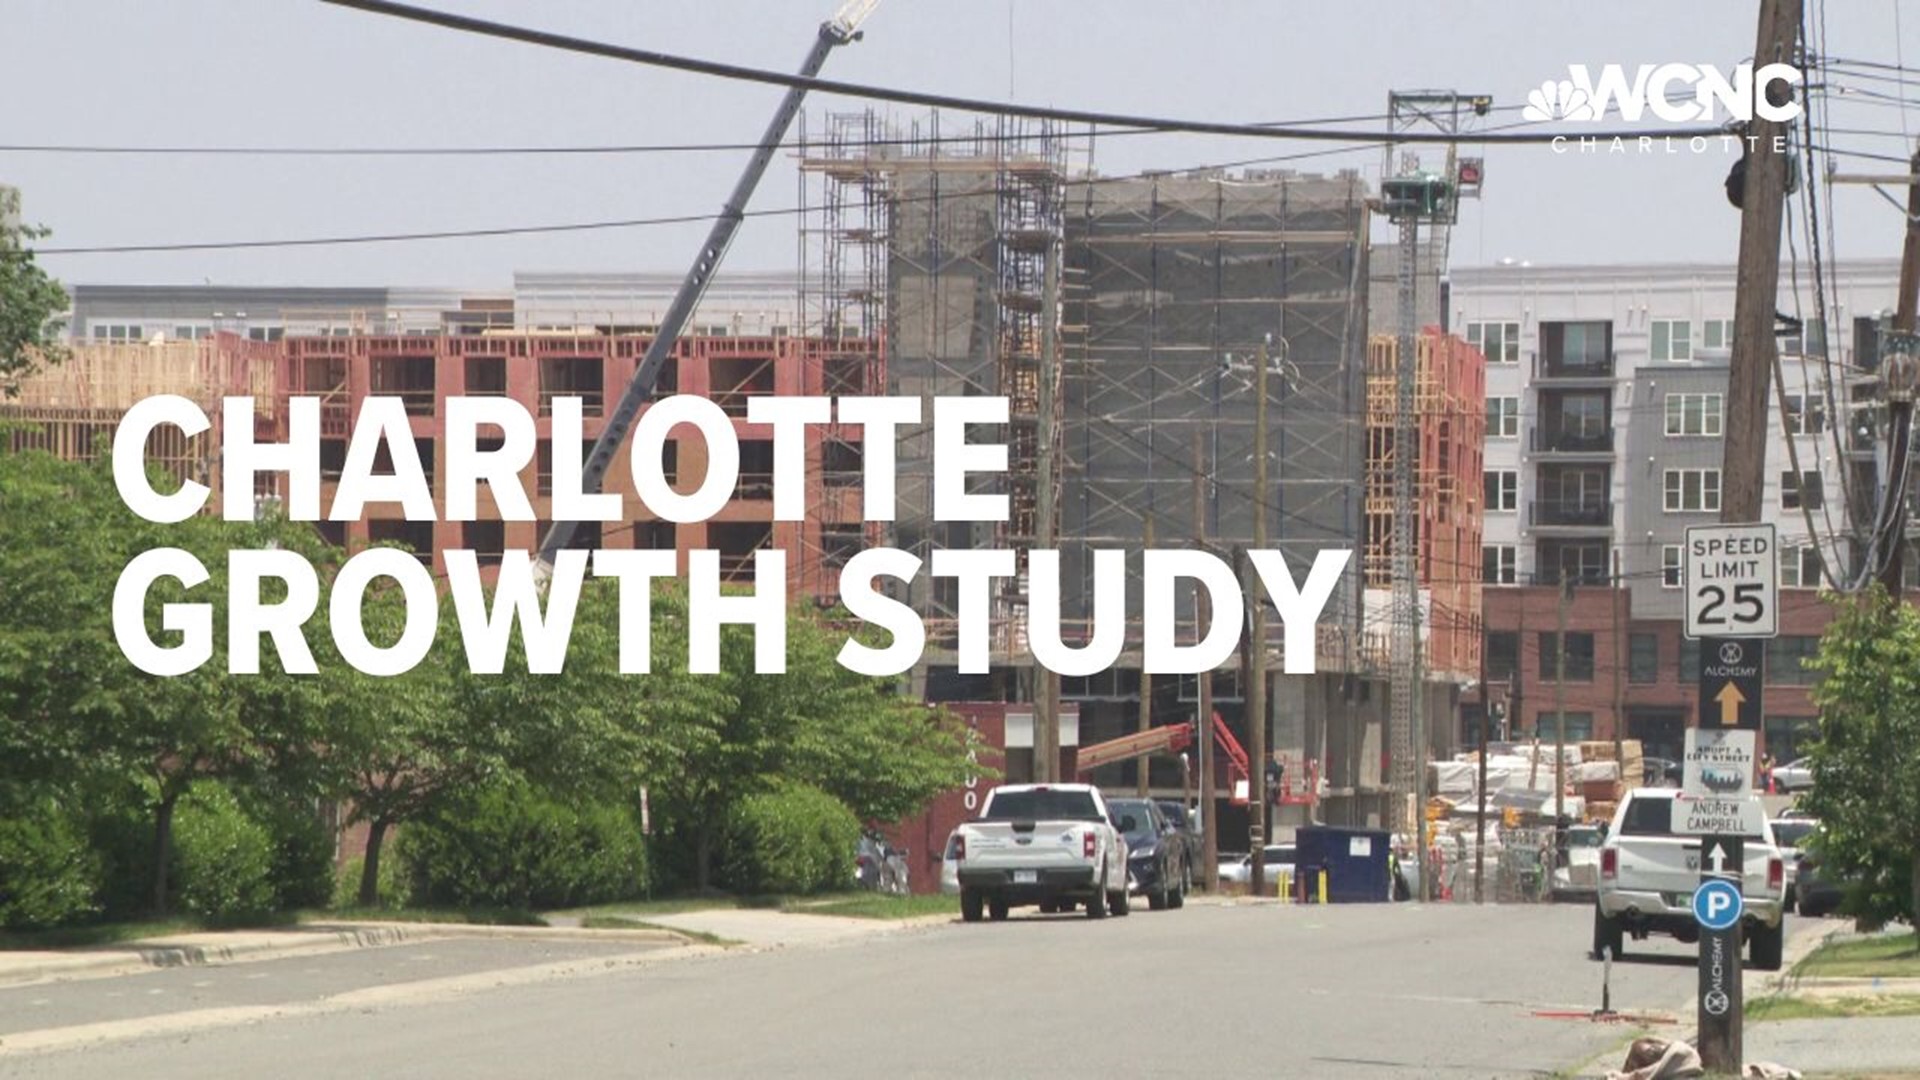 A new study by the Charlotte Regional Business Alliance found more than 100 people a day are moving to the region - the highest level in more than a decade.